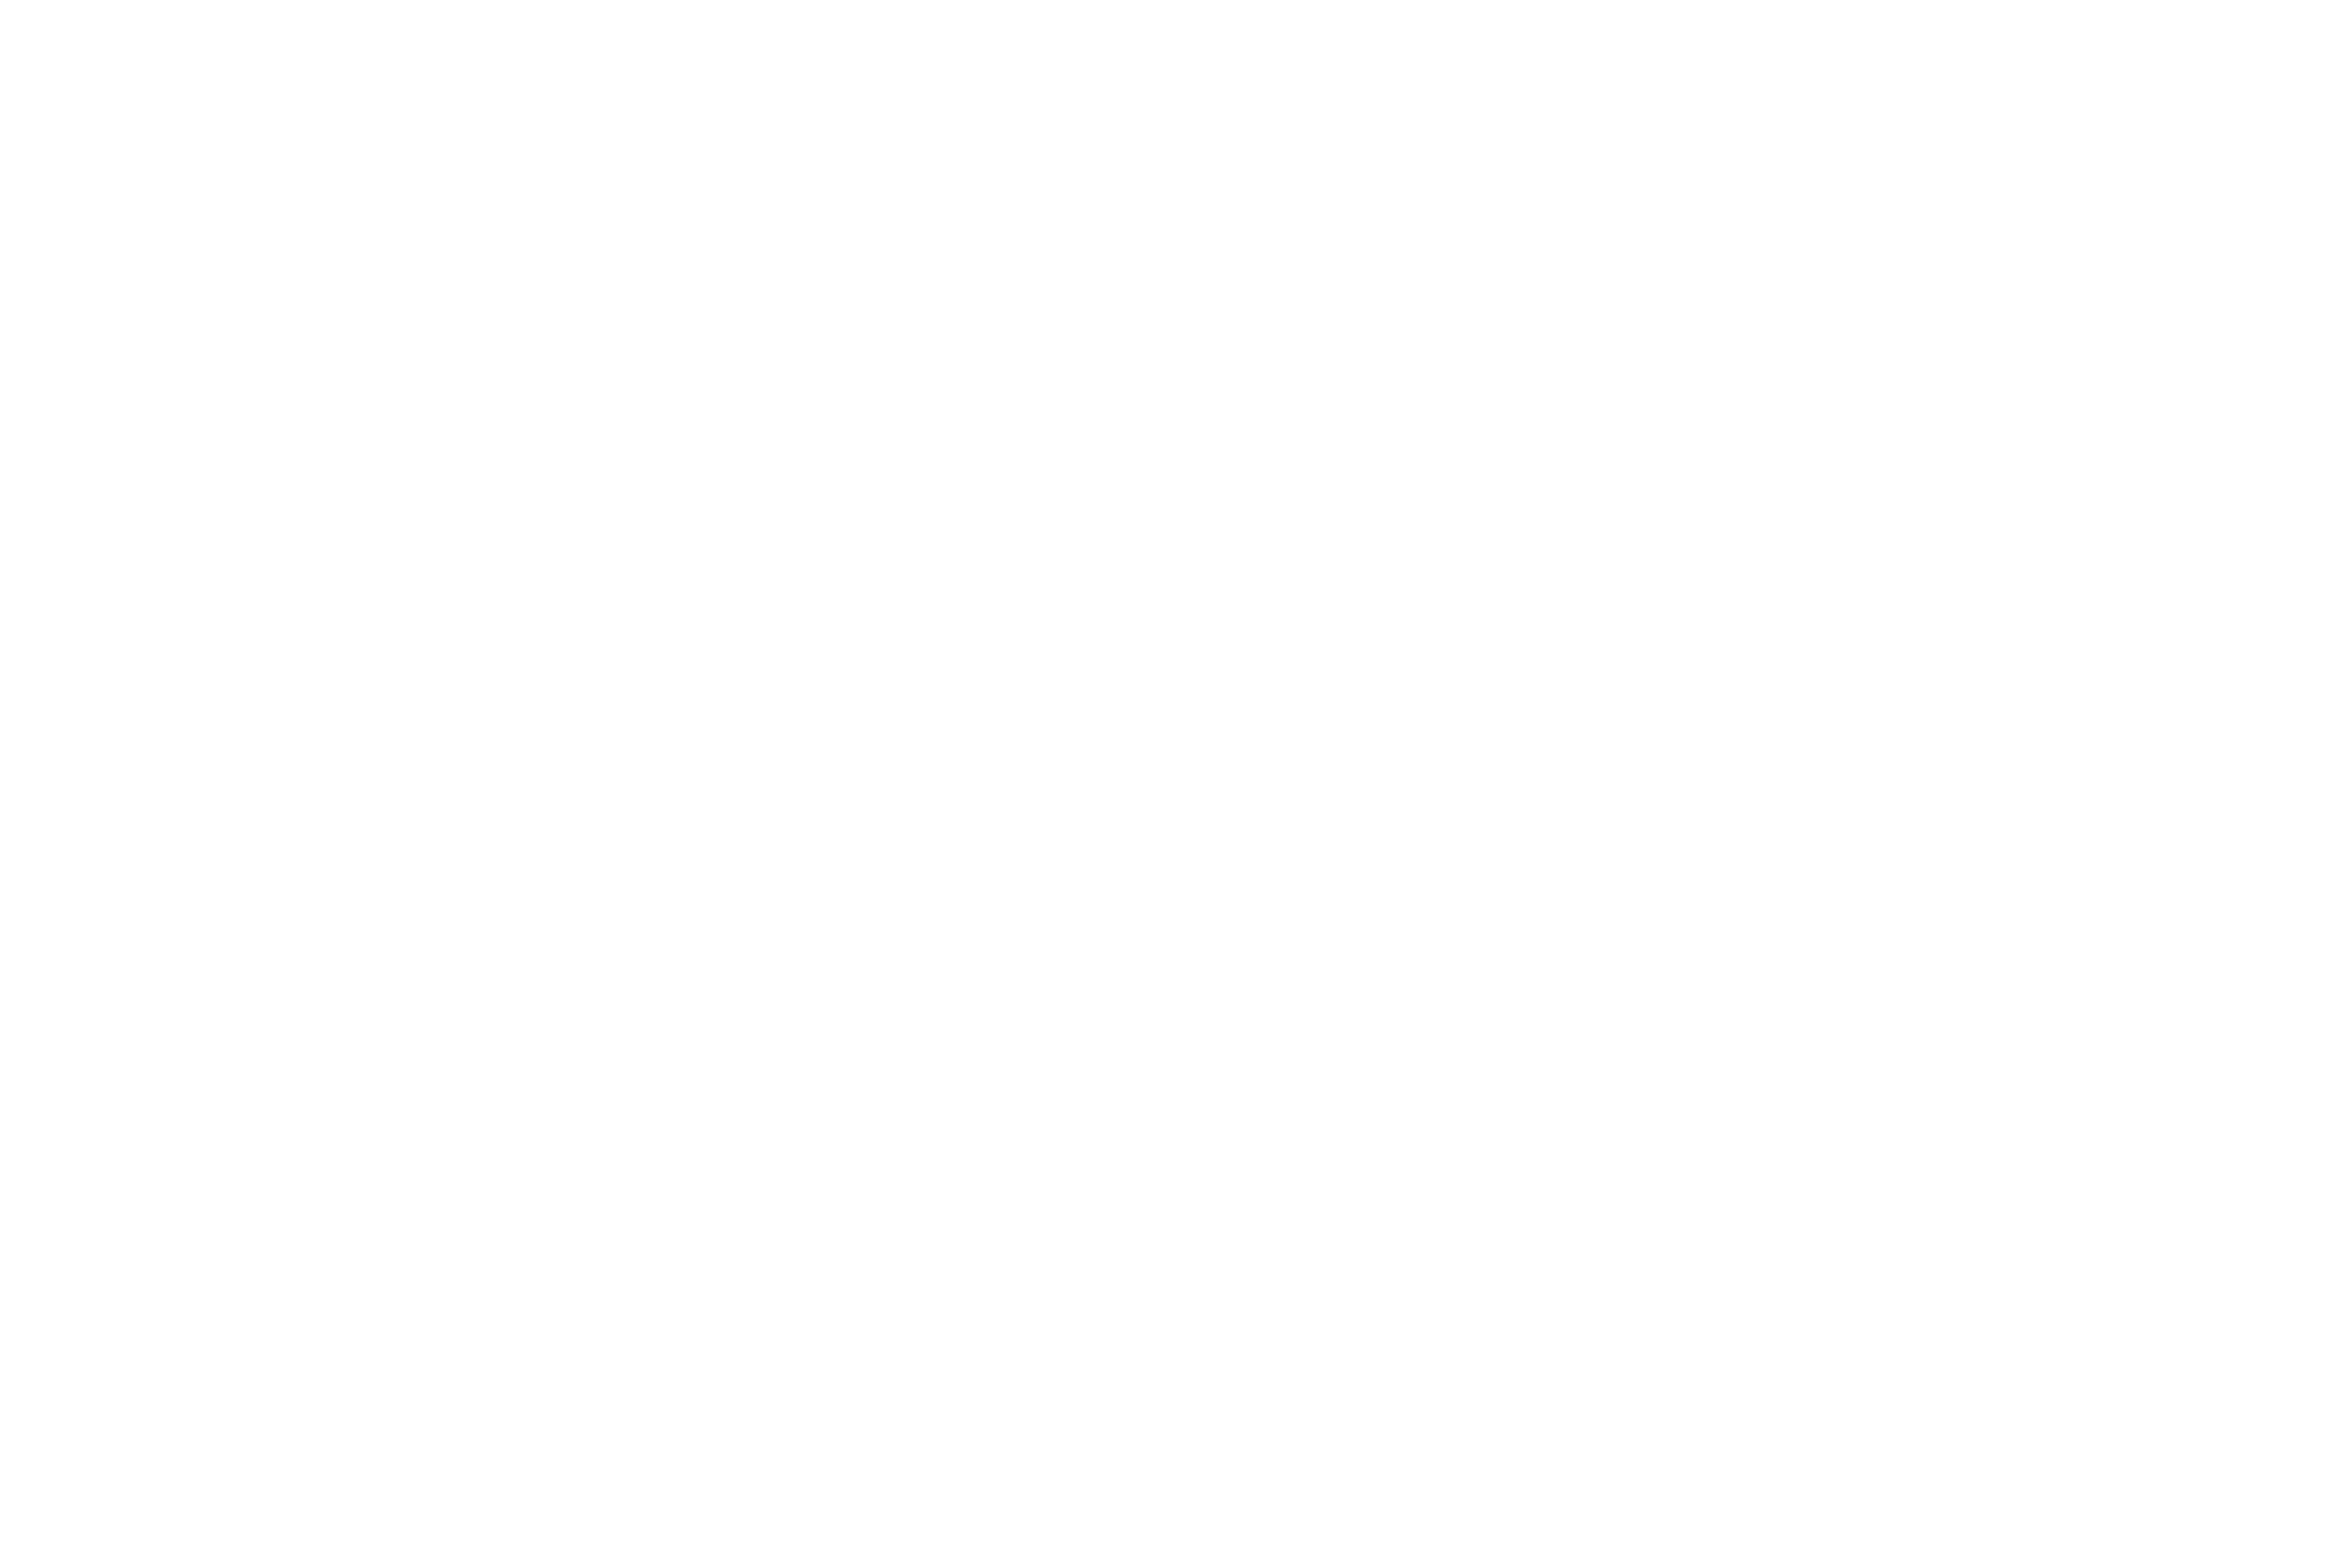 Carter Perry Bailey Brand Identity by Peek Creative Limited